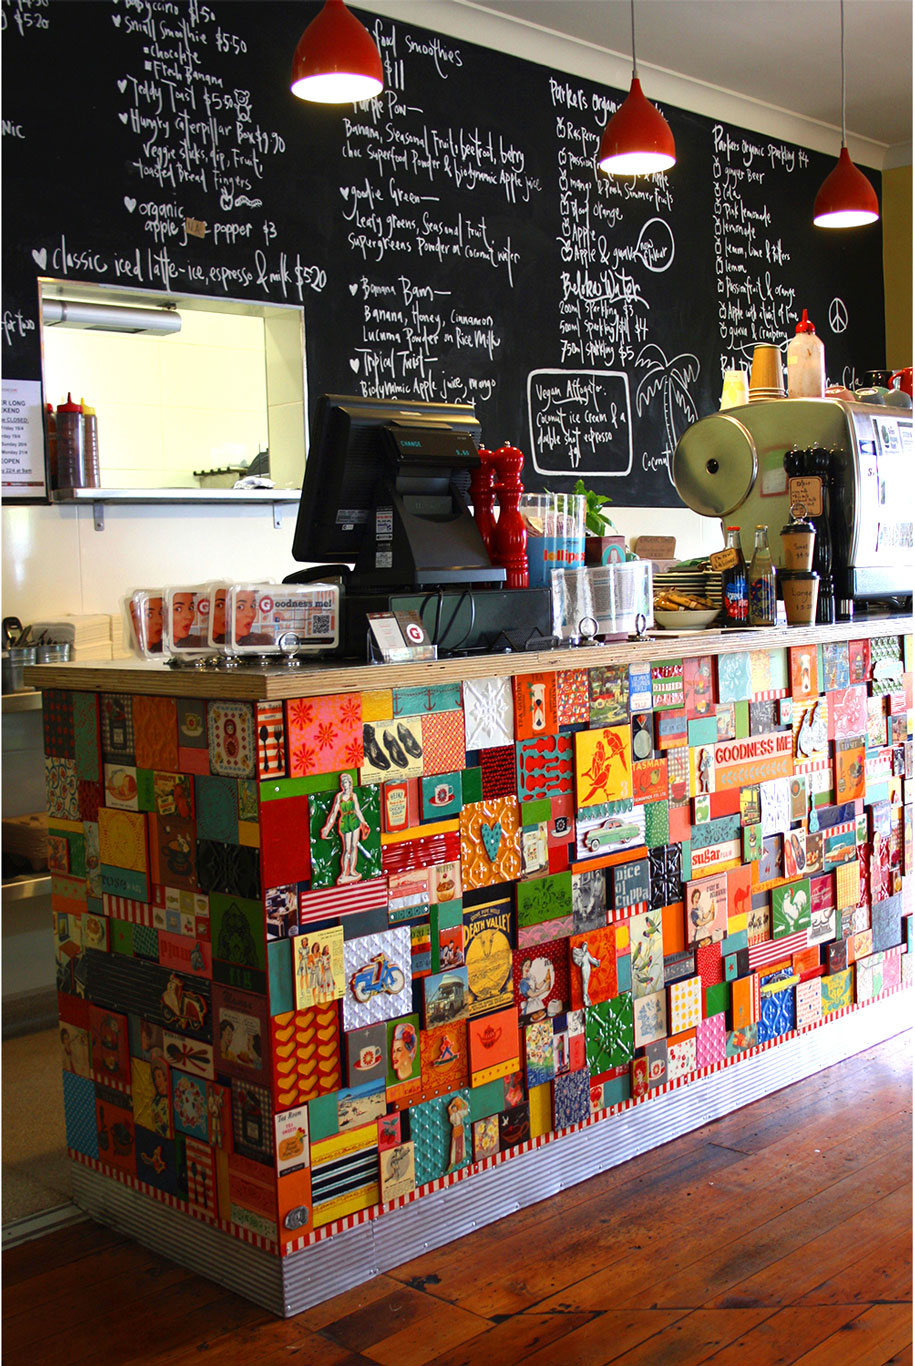 NEWCafe-Counter-2-Bespoke-Surface-Design-The-Strutt-Sisters